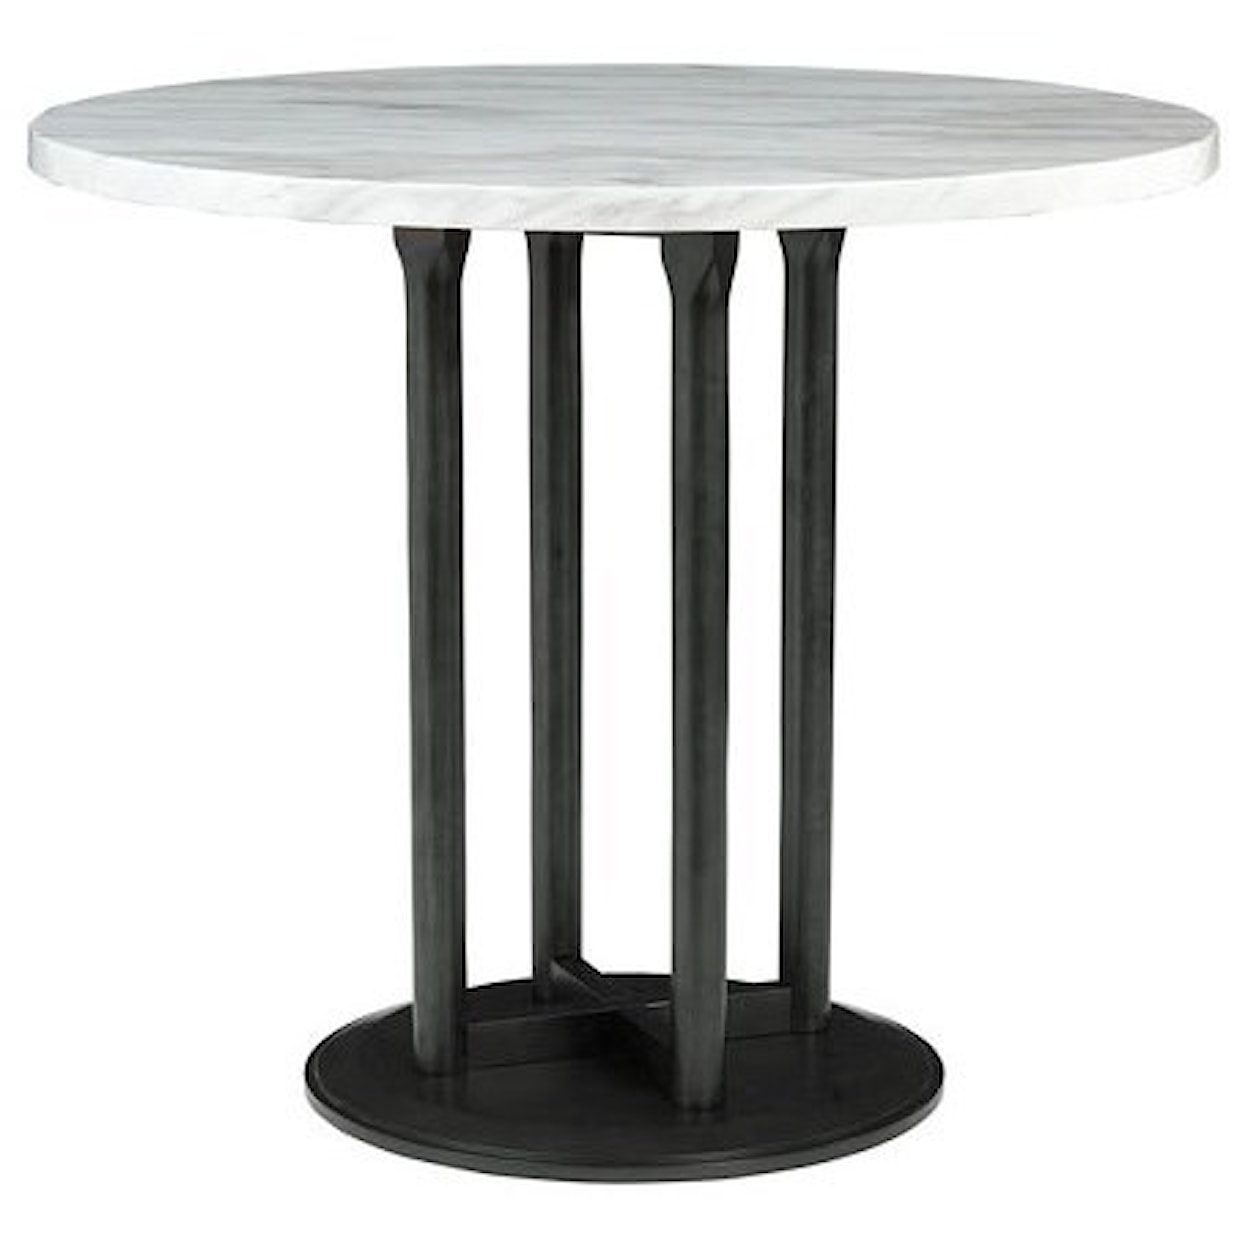 Benchcraft Centiar Round Dining Room Counter Table